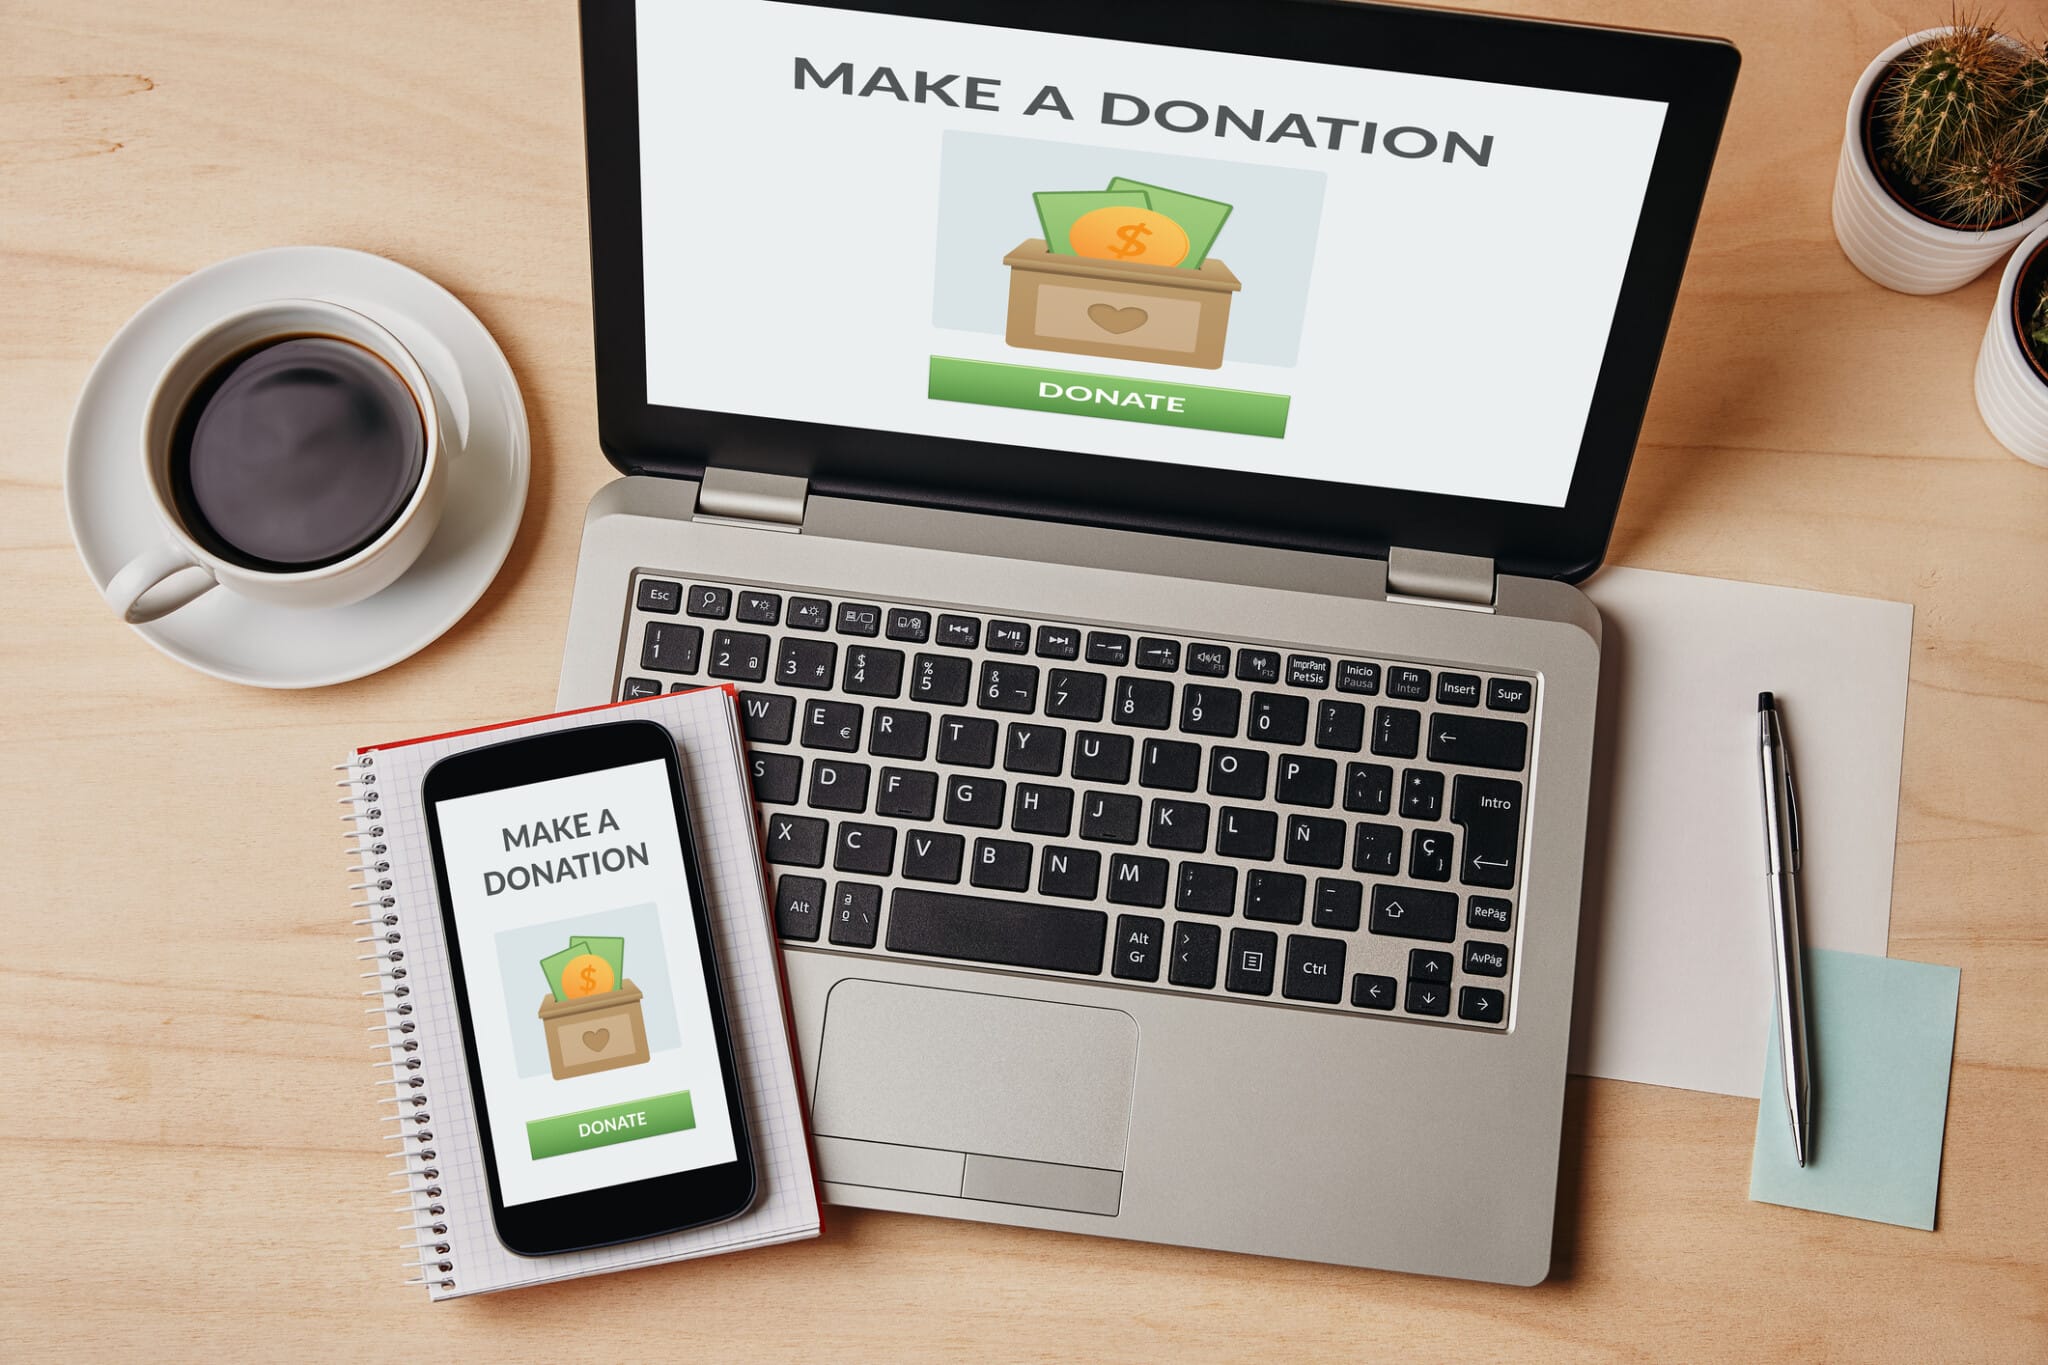 Non-profit donation webpage example show on both laptop and mobile devices.